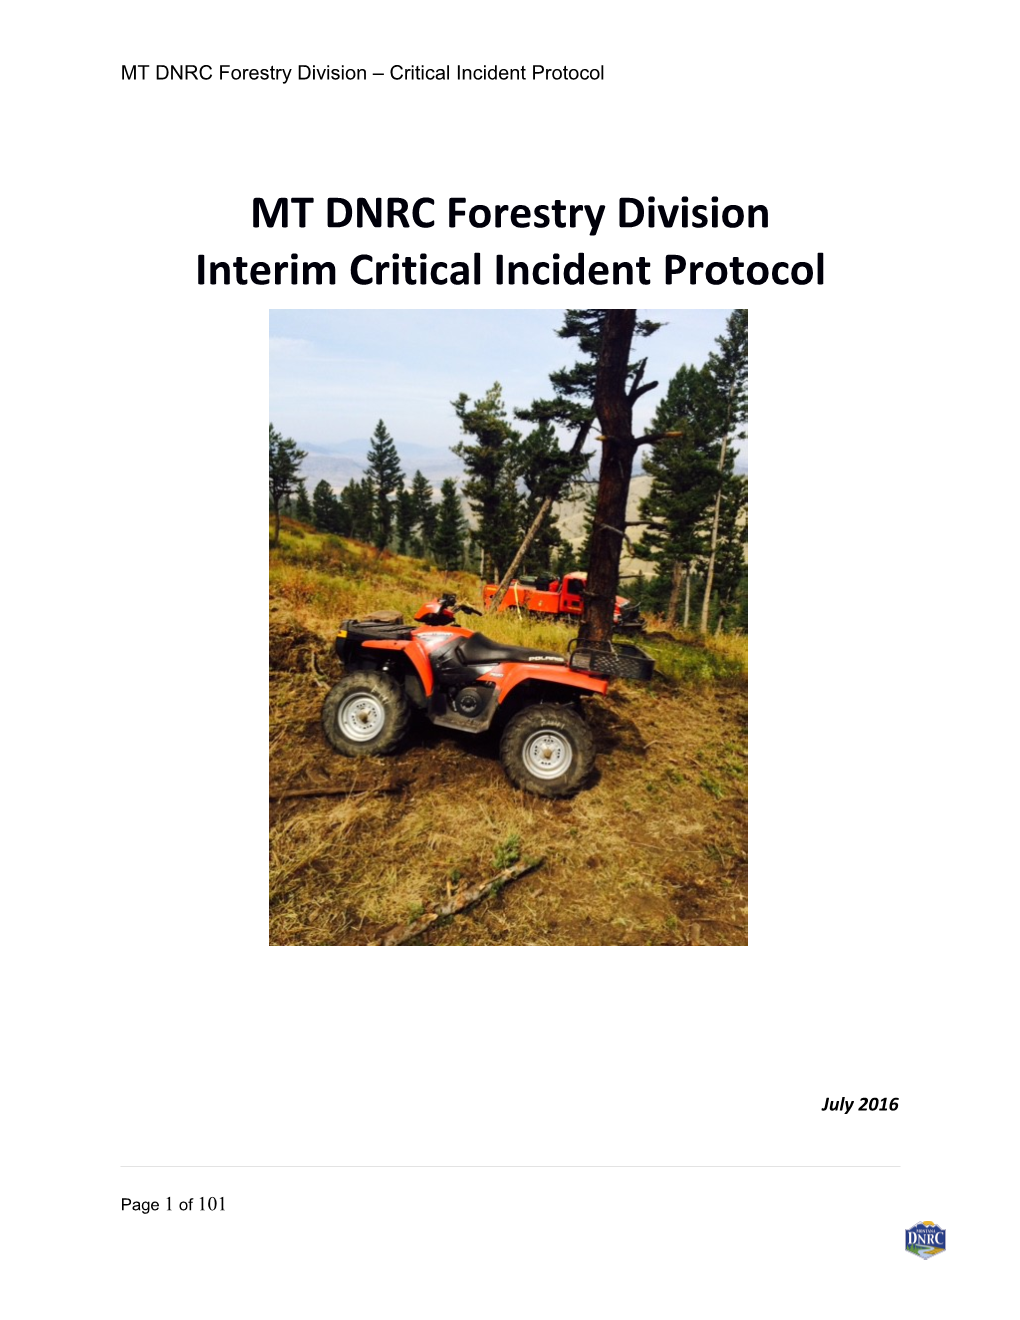 MT DNRC Forestry Division Critical Incident Protocol